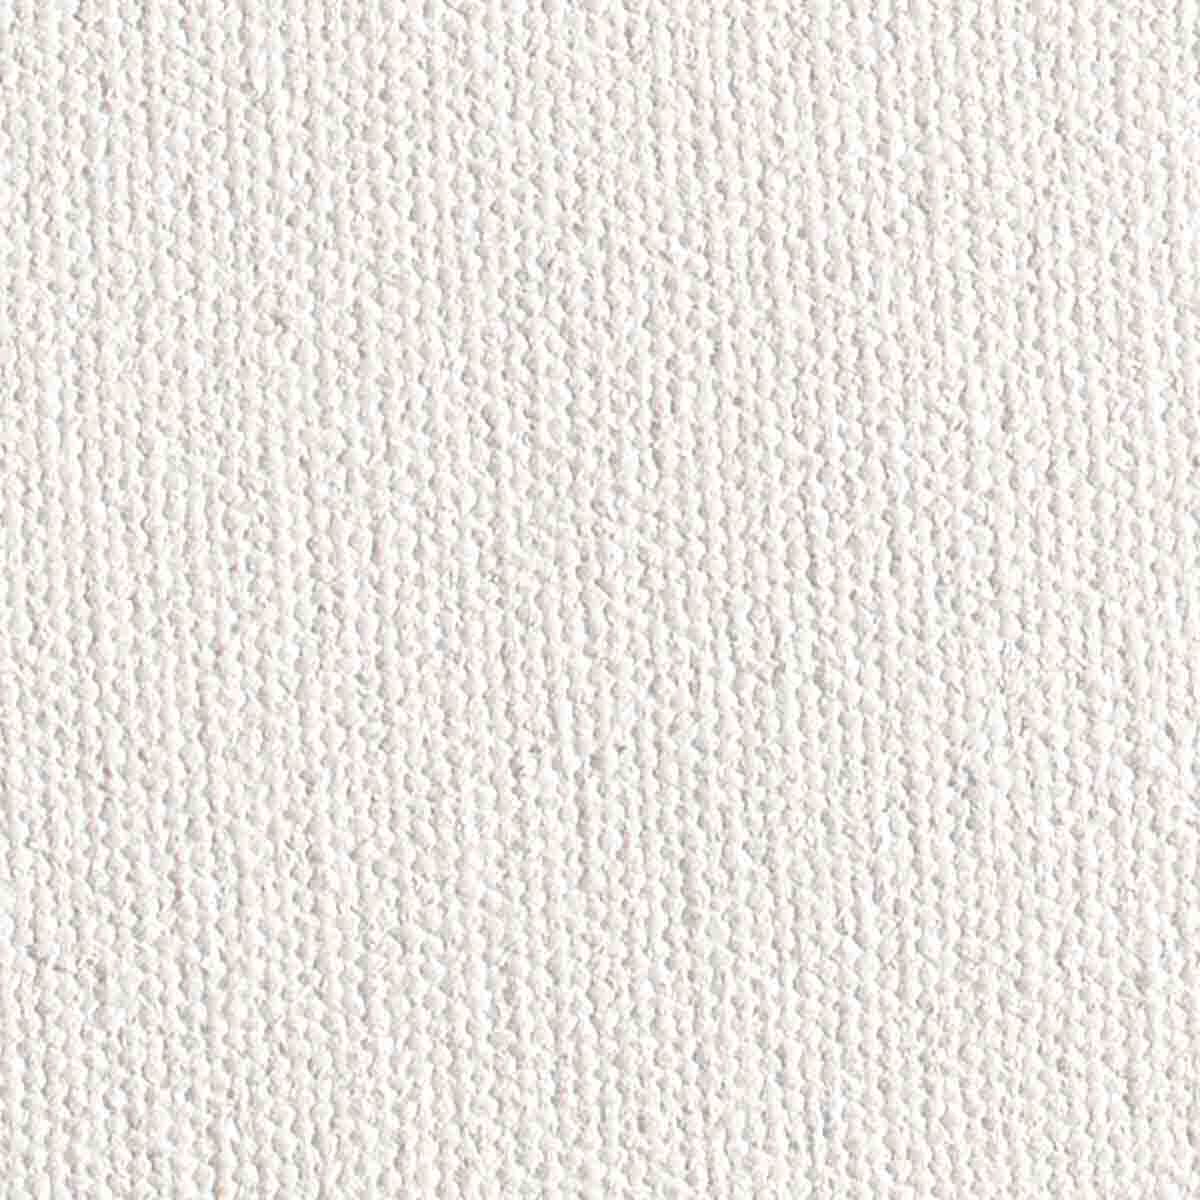 Canvasify 12oz Primed Cotton Canvas Rolls for